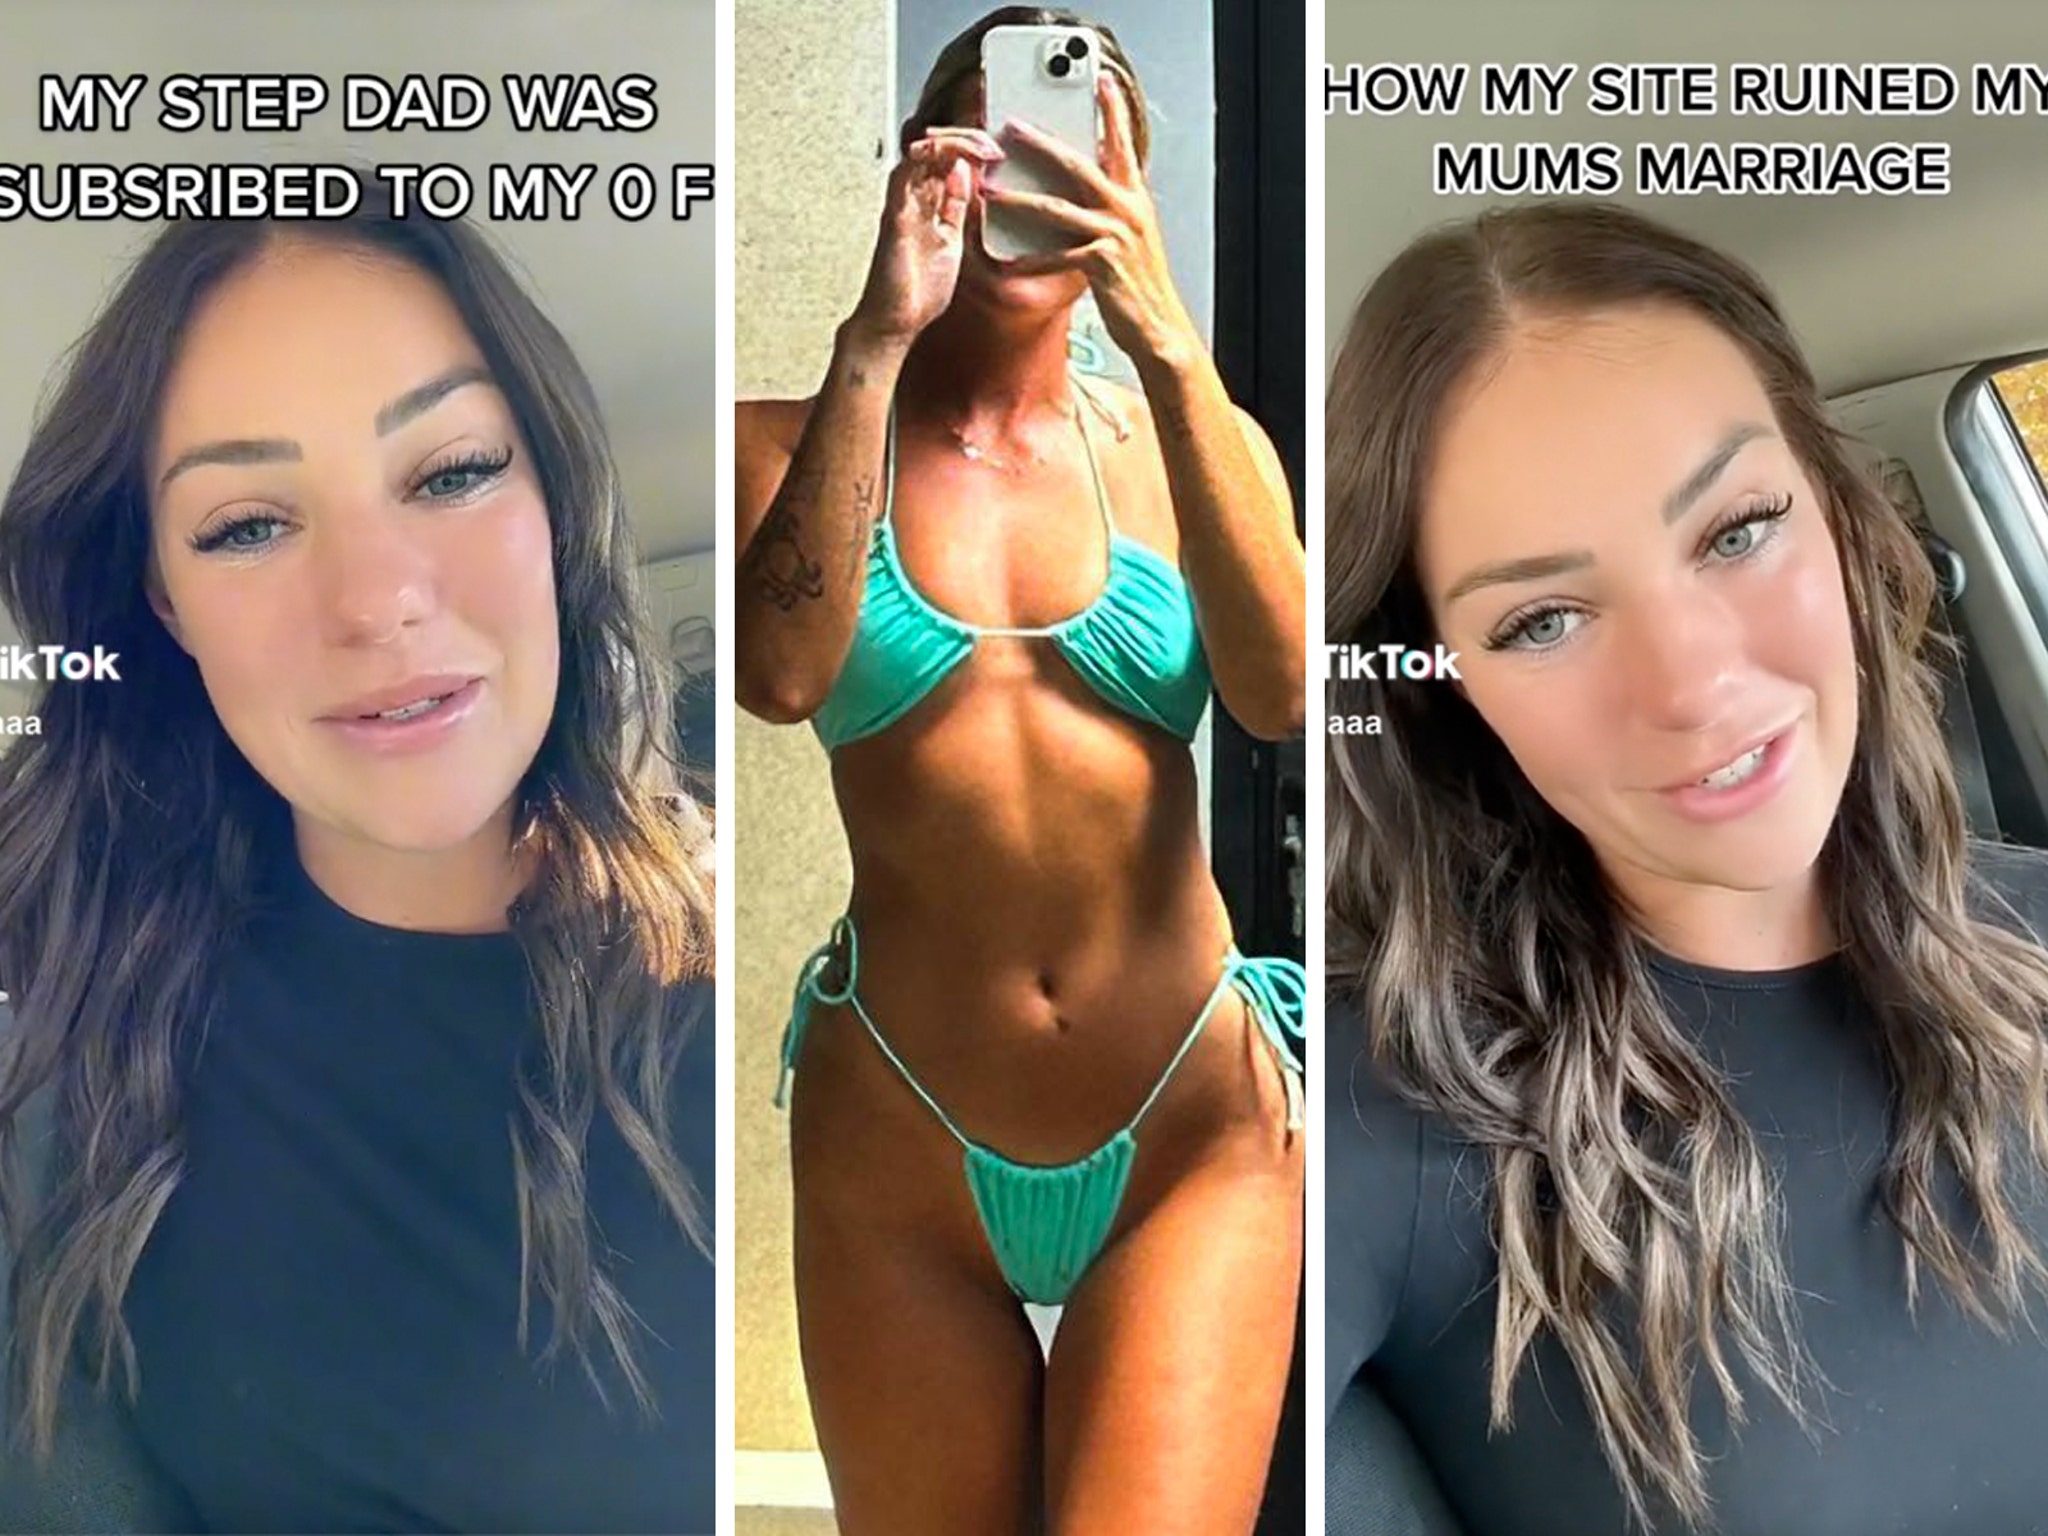 OnlyFans Model Says She Ruined Moms Marriage Exposing Stepdad As Top Subscriber pic